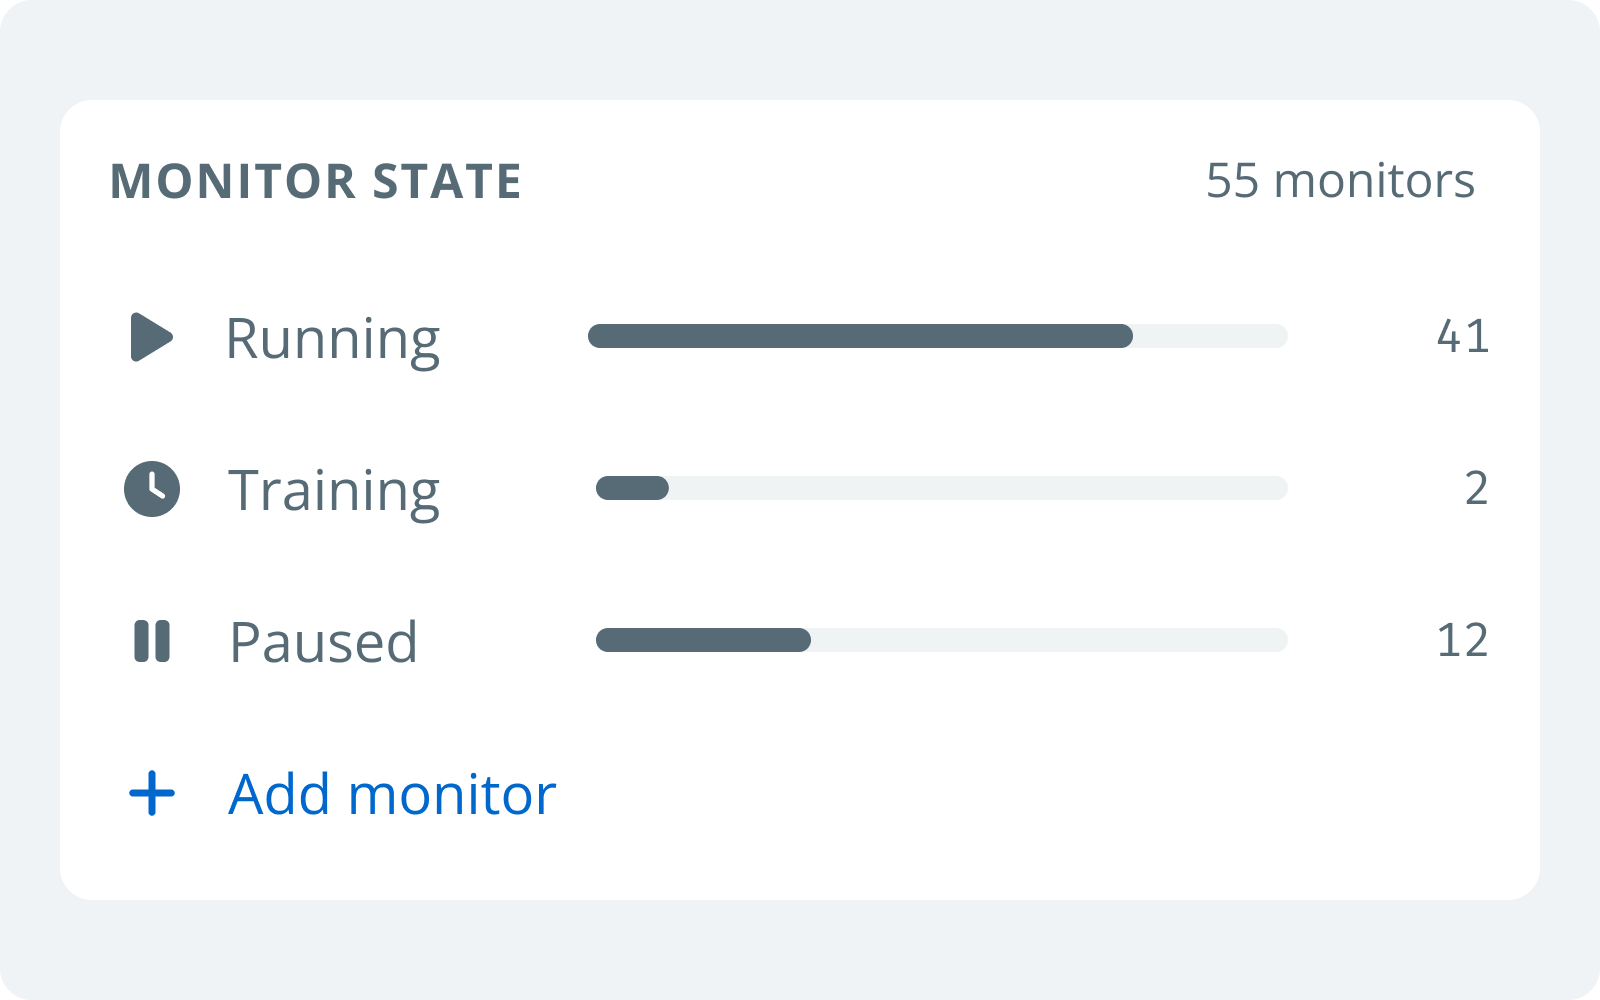 Monitor state